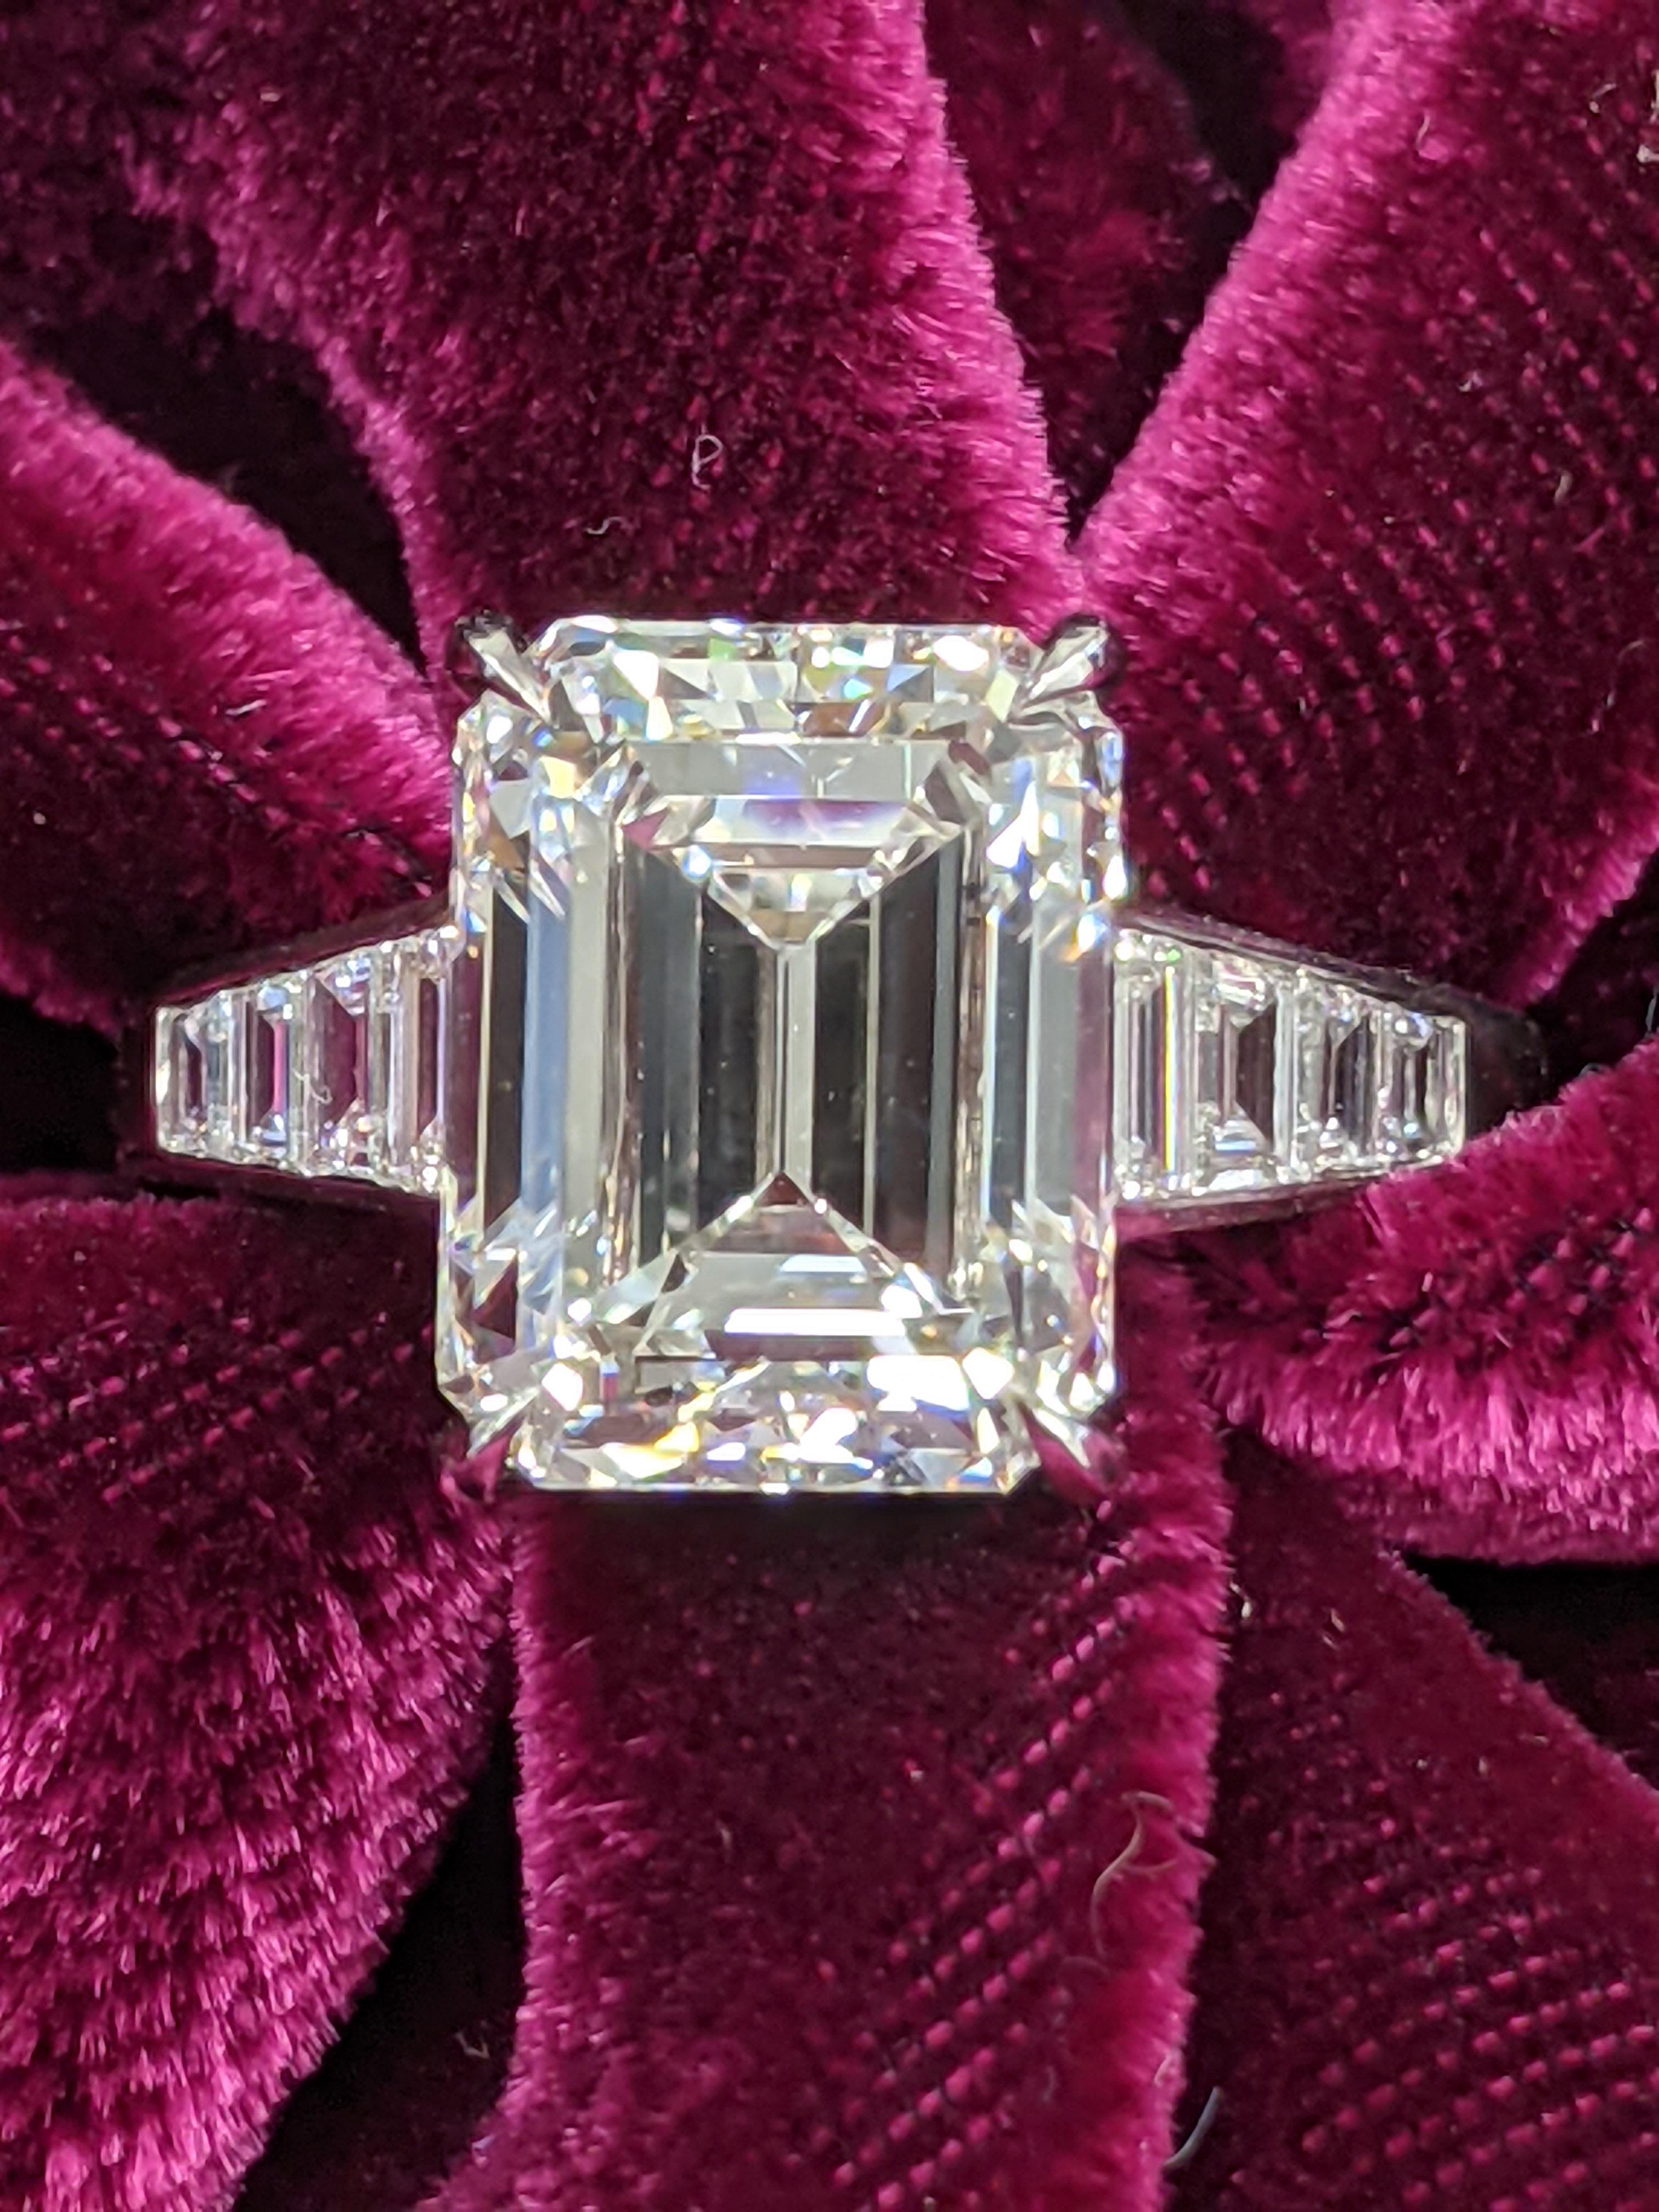 Center diamond is 5.01 carats emerald shape, H color, VVS2 clarity (GIA Report upon request) mounted in a one-of-a-kind, spectacular platinum setting with eight small trapezoids (0.62ct), four flanking each side of the diamond in a stunning